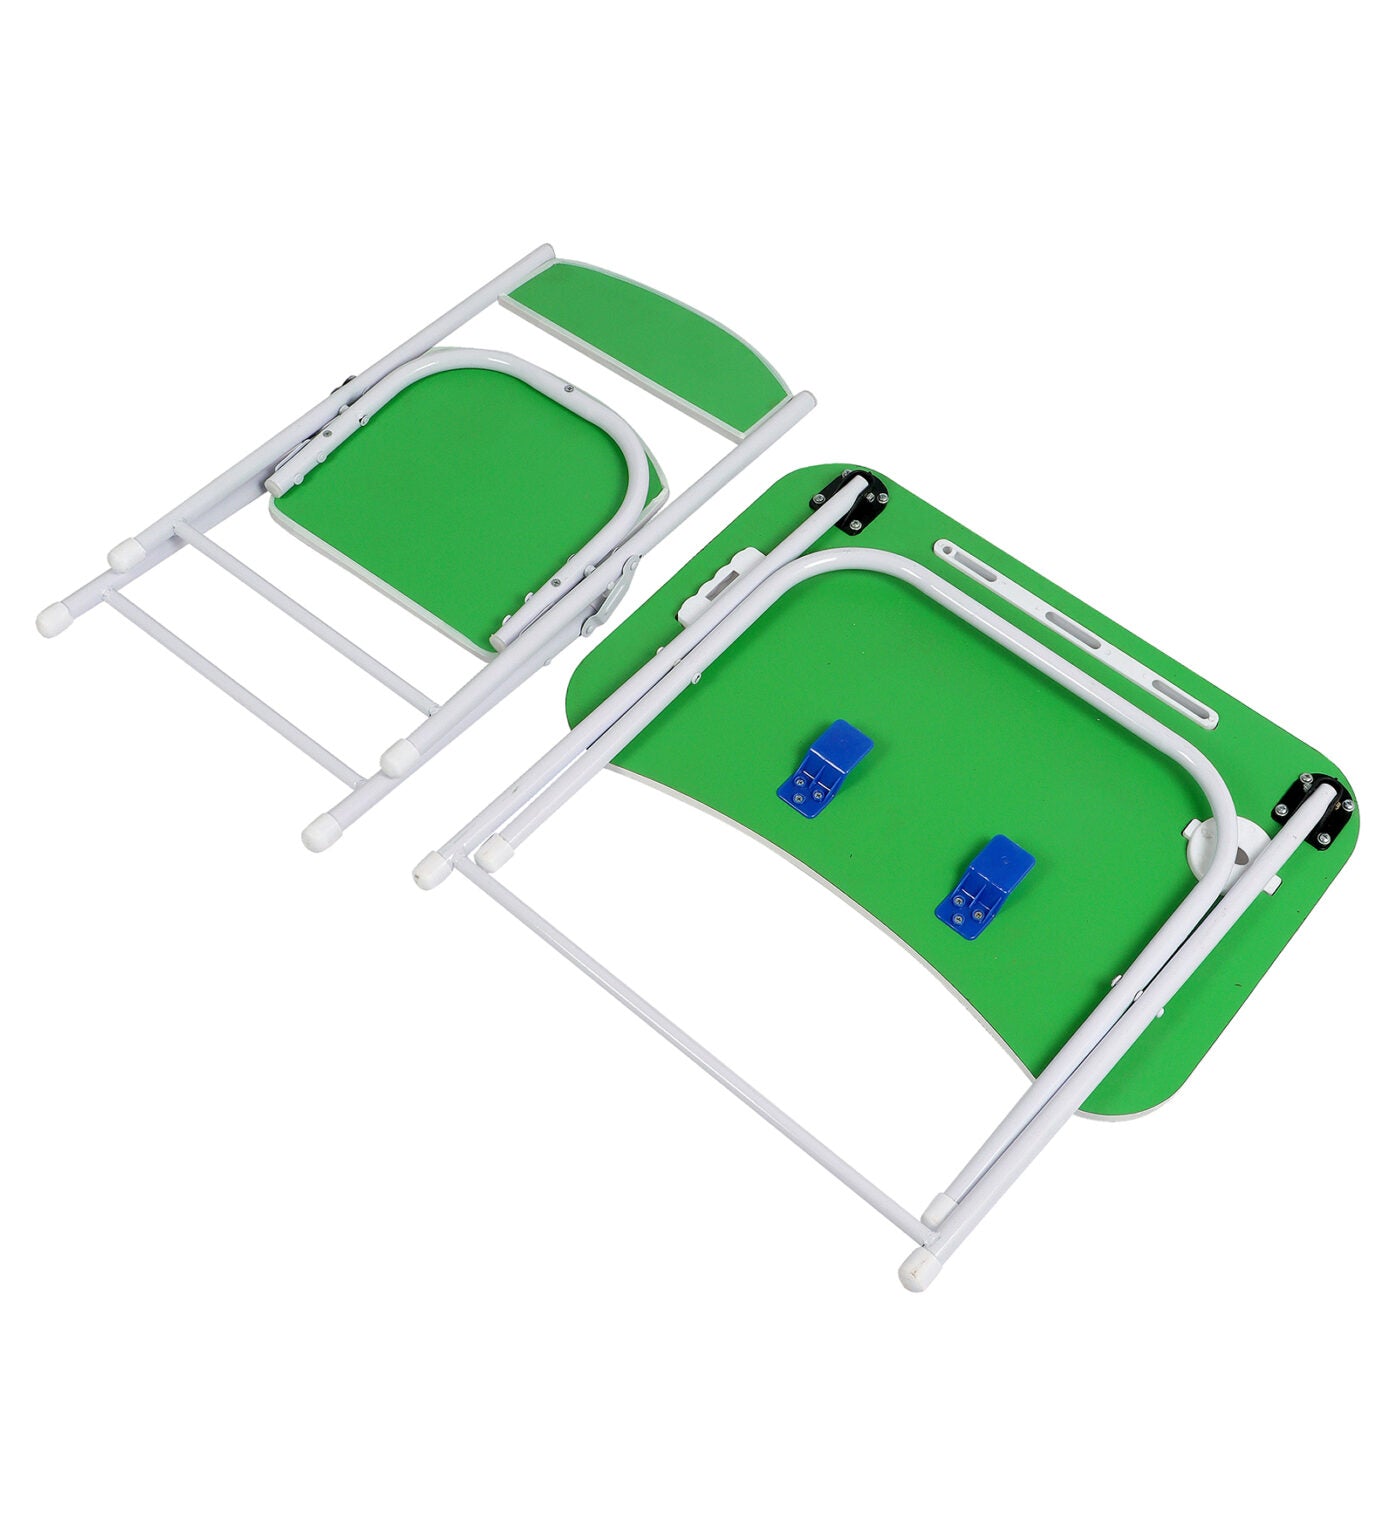 Foldable Table Chair Set Green (3-6 yrs)